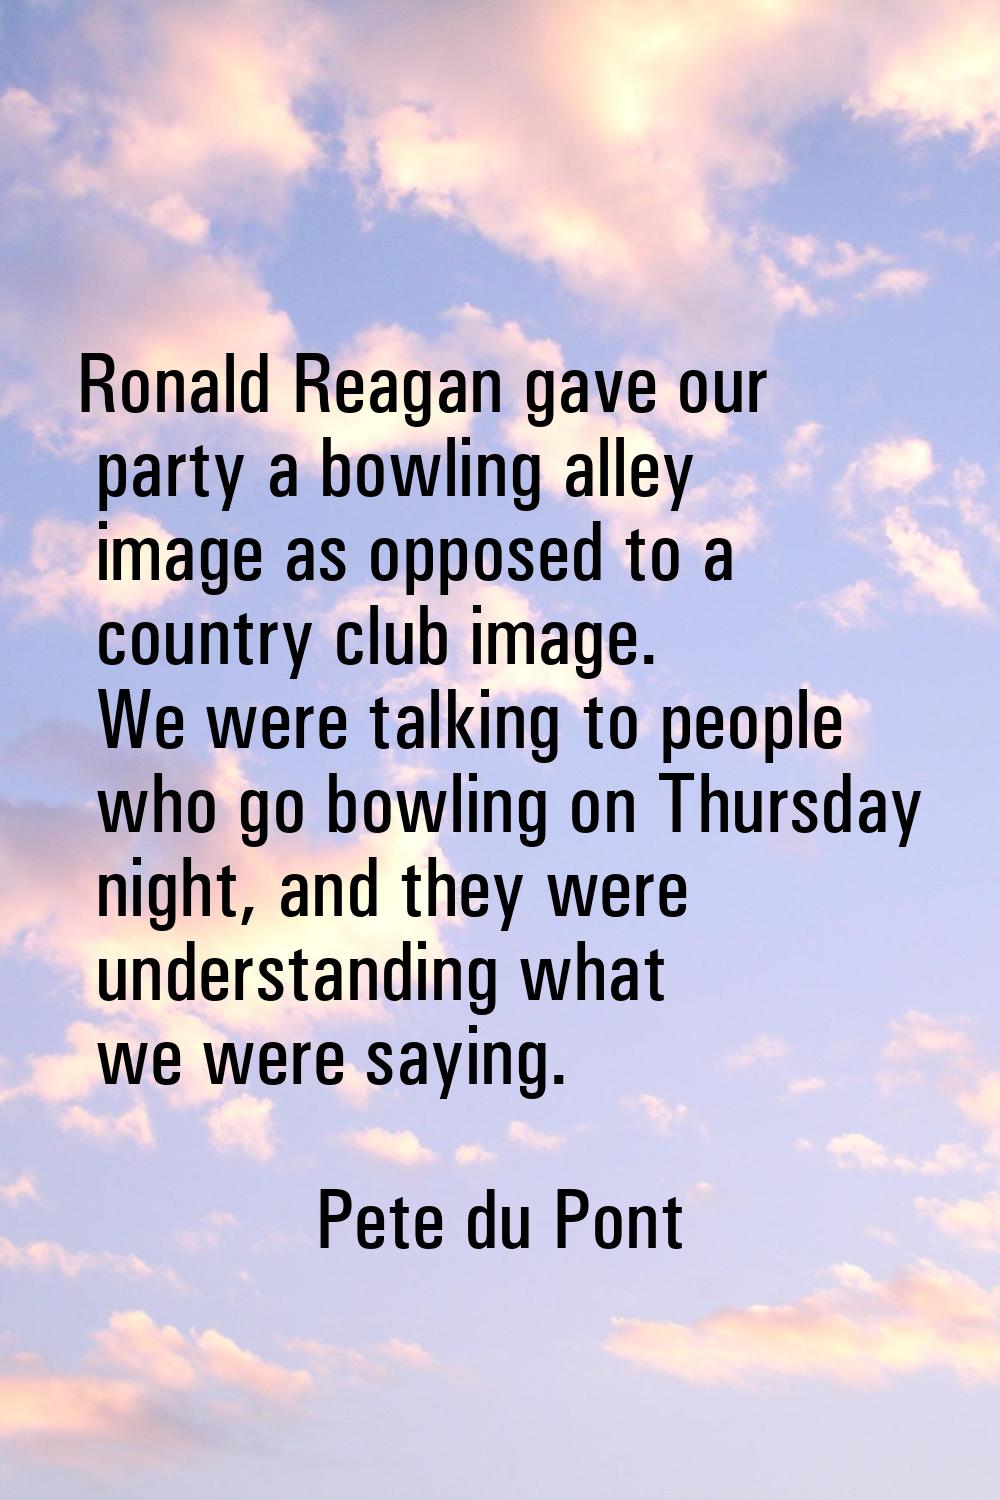 Ronald Reagan gave our party a bowling alley image as opposed to a country club image. We were talk